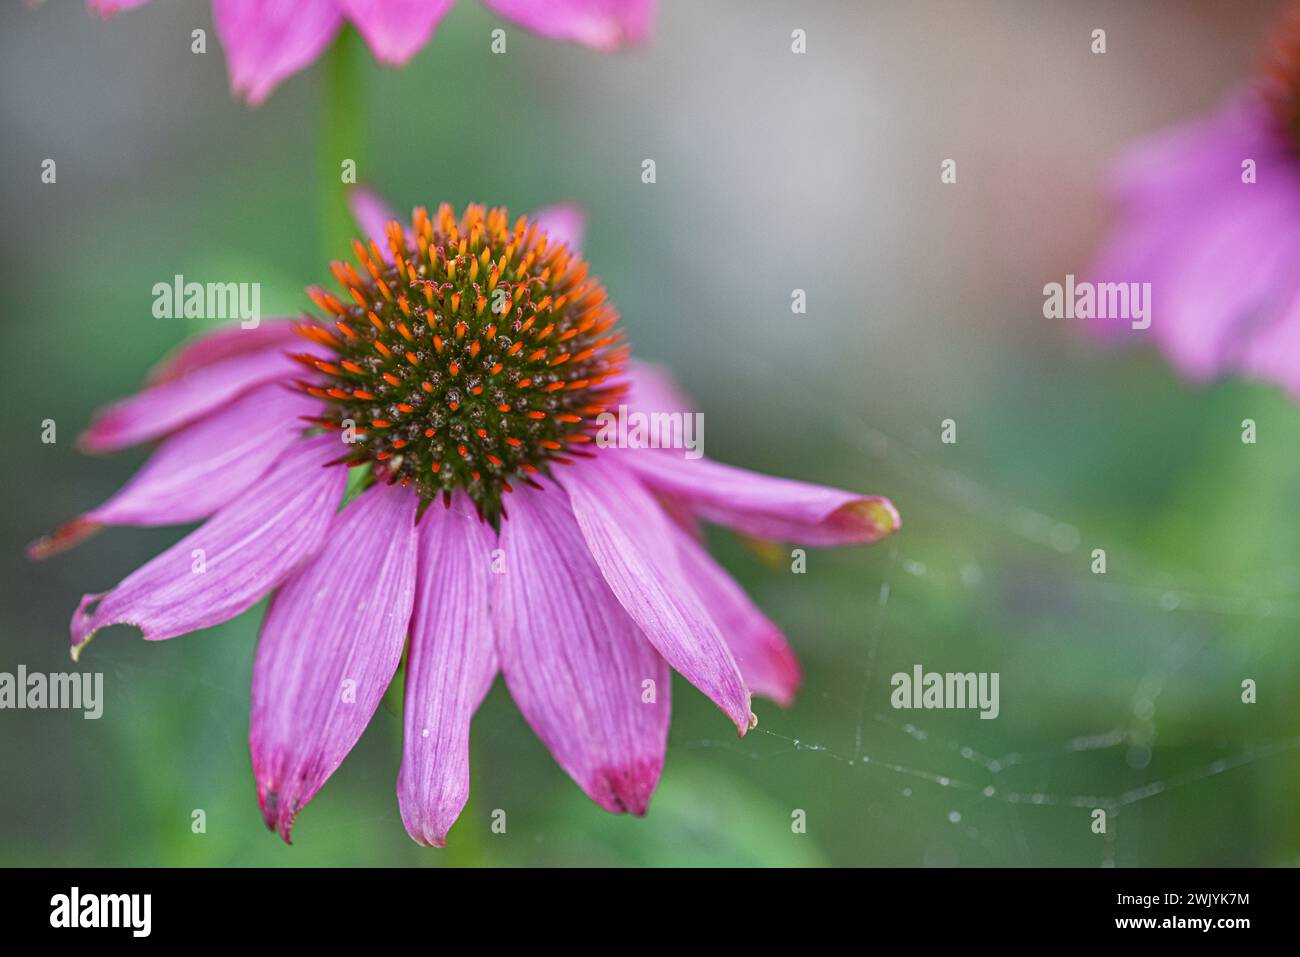 Attractive to bees and butterflies,  short-lived echinacea purpurea, or coneflower. Close up photograph of flower head with selective focus on petals. Stock Photo